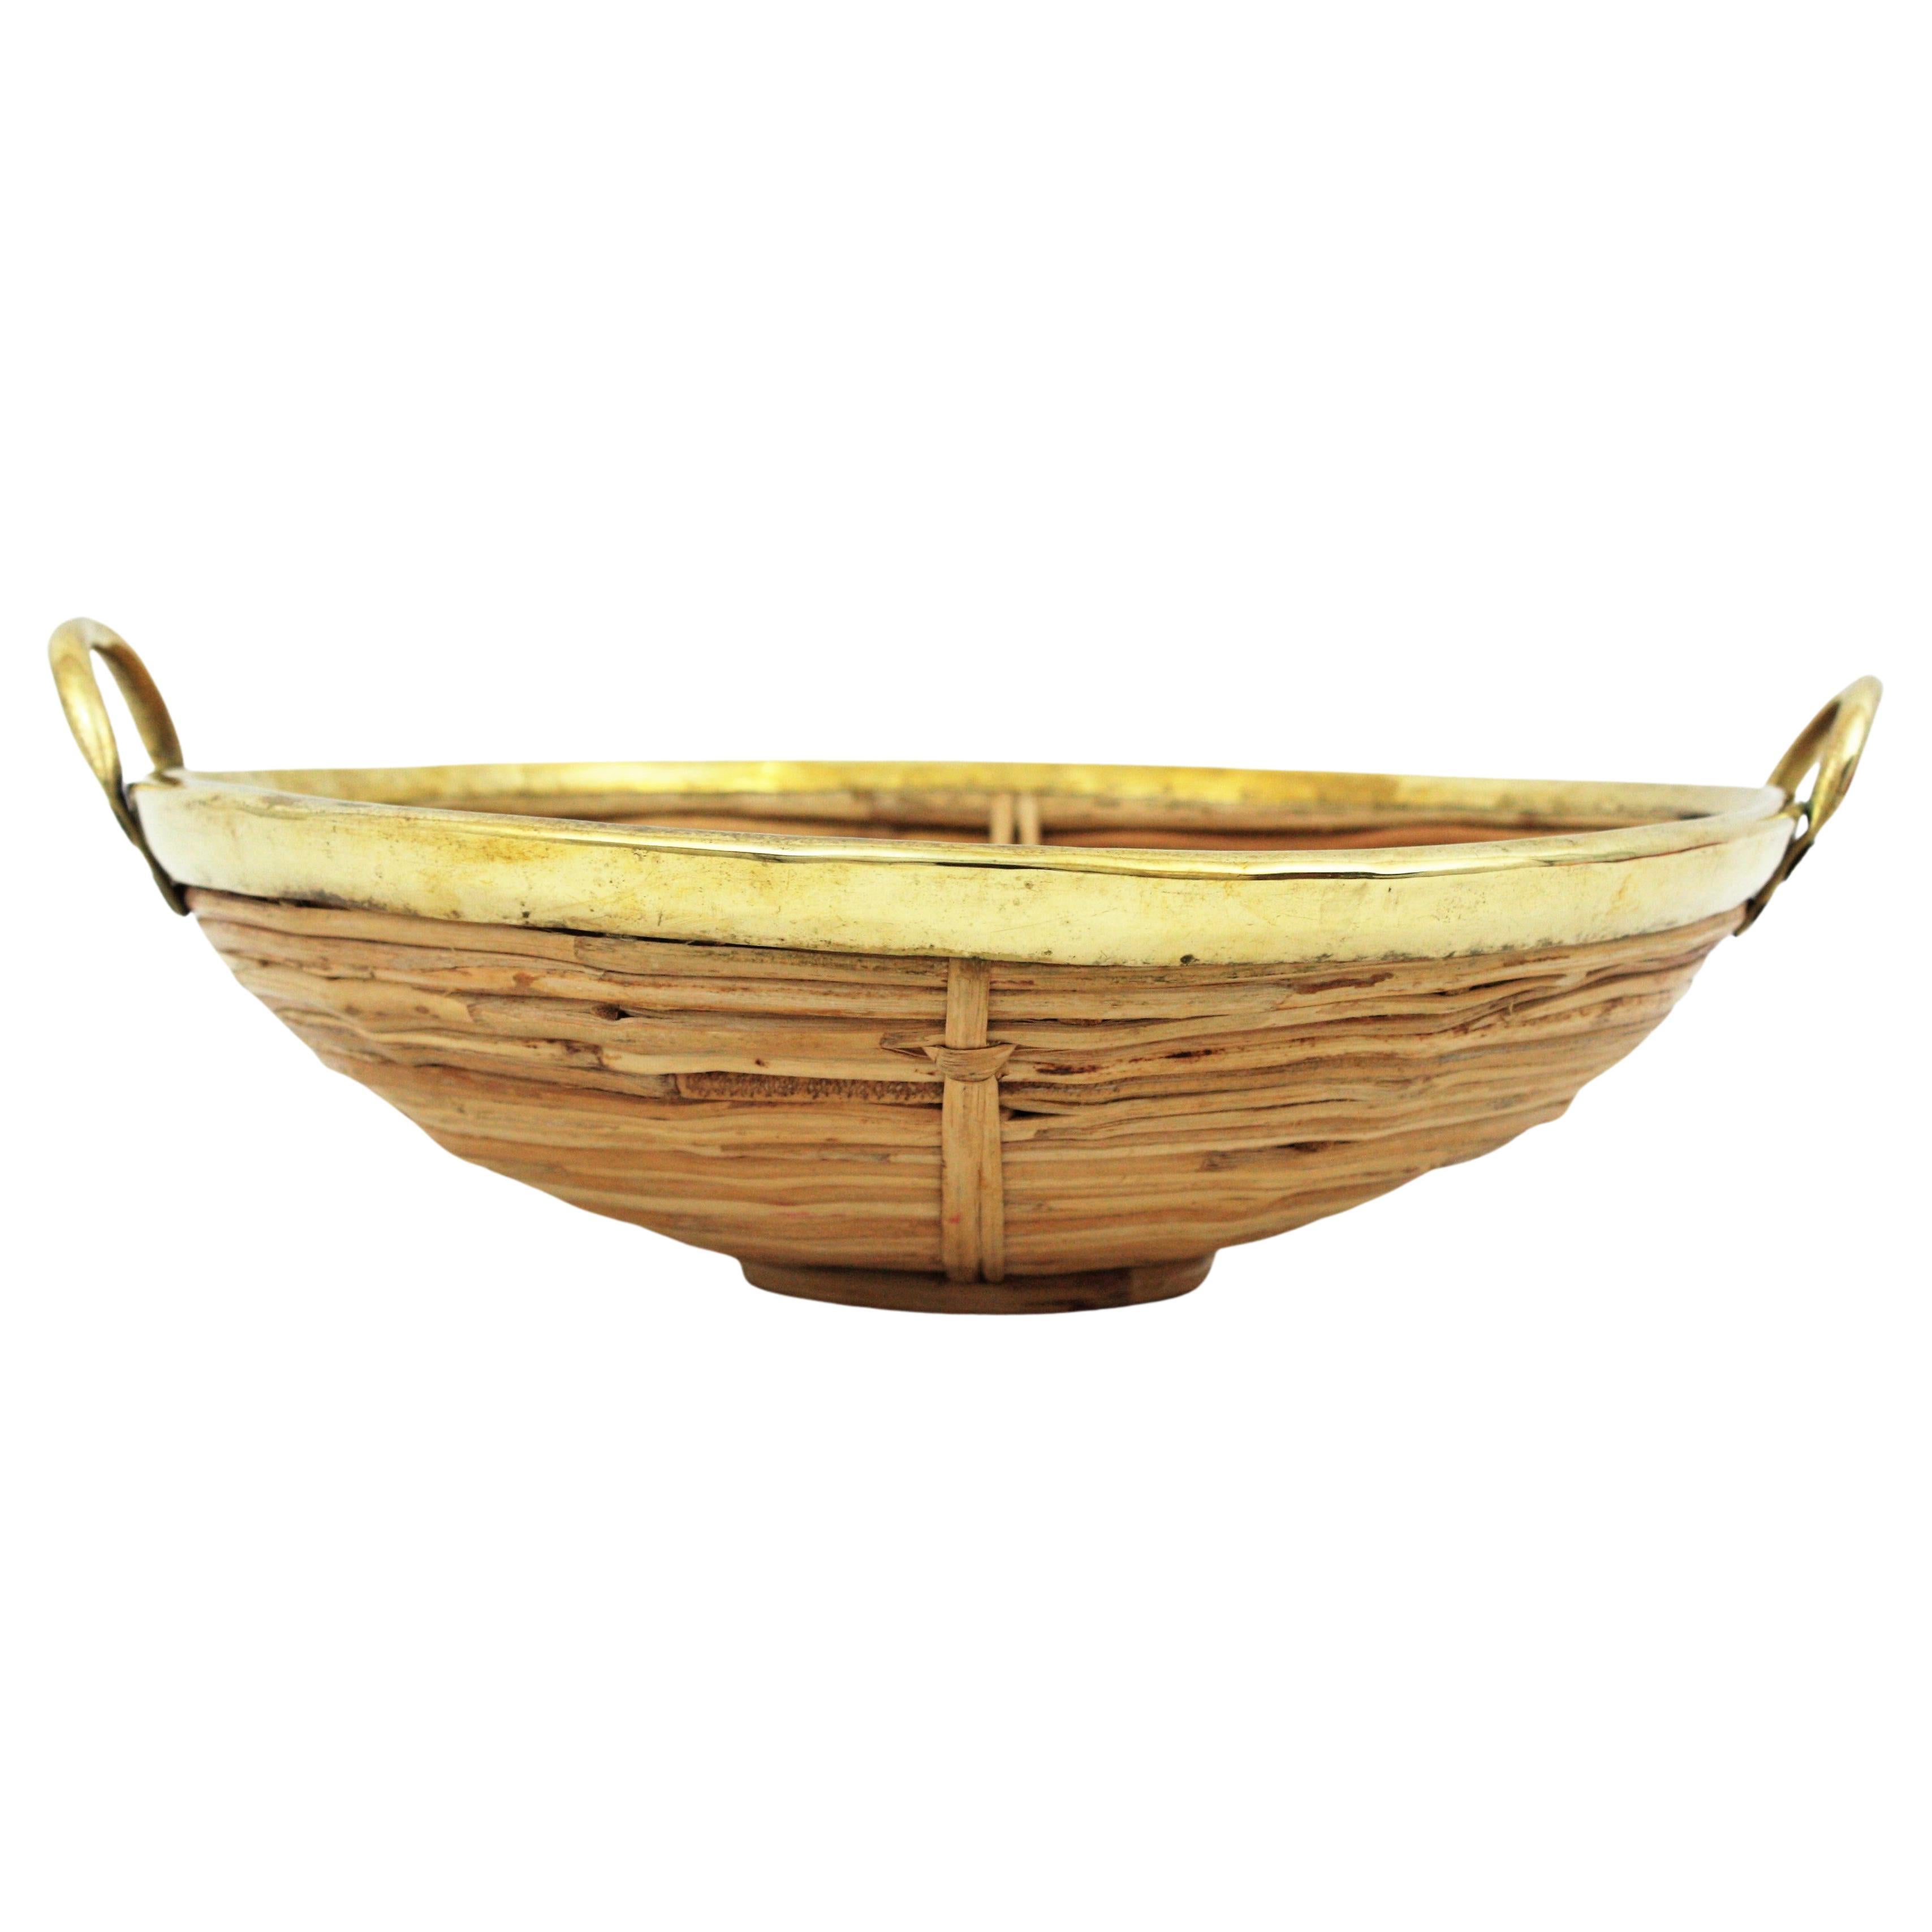 Hand-Crafted Rattan and Brass Italian Centerpiece Basket with Handles, 1970s For Sale